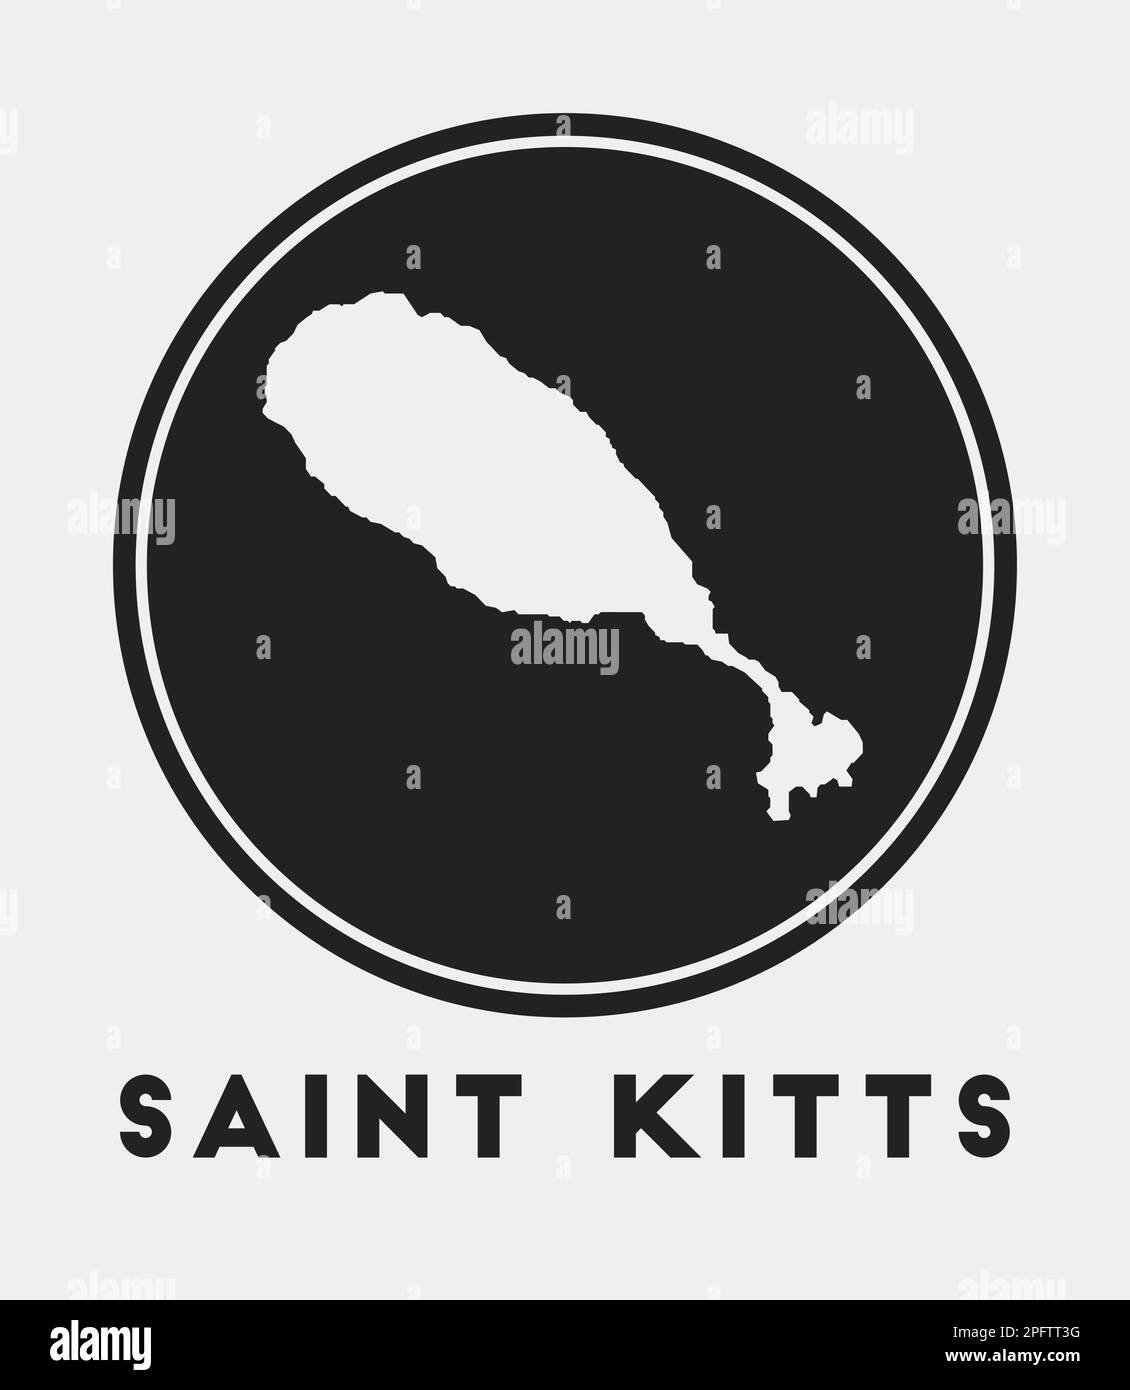 Saint Kitts icon. Round logo with island map and title. Stylish Saint Kitts badge with map. Vector illustration. Stock Vector